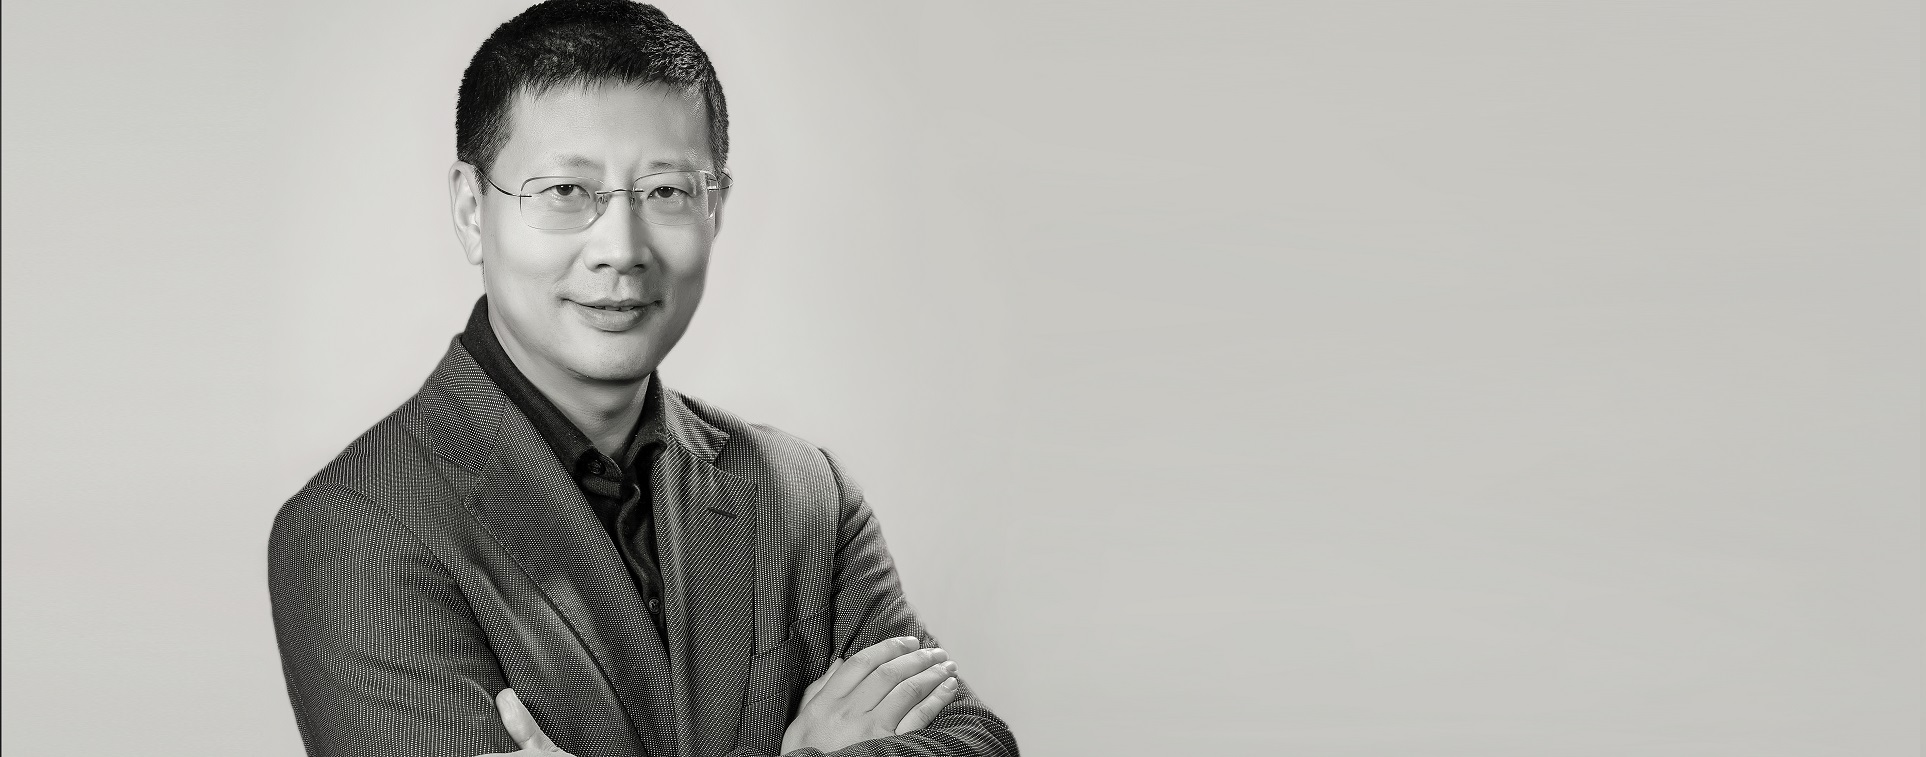 Neil Shen is the Founding & Managing Partner of Sequoia Capital China